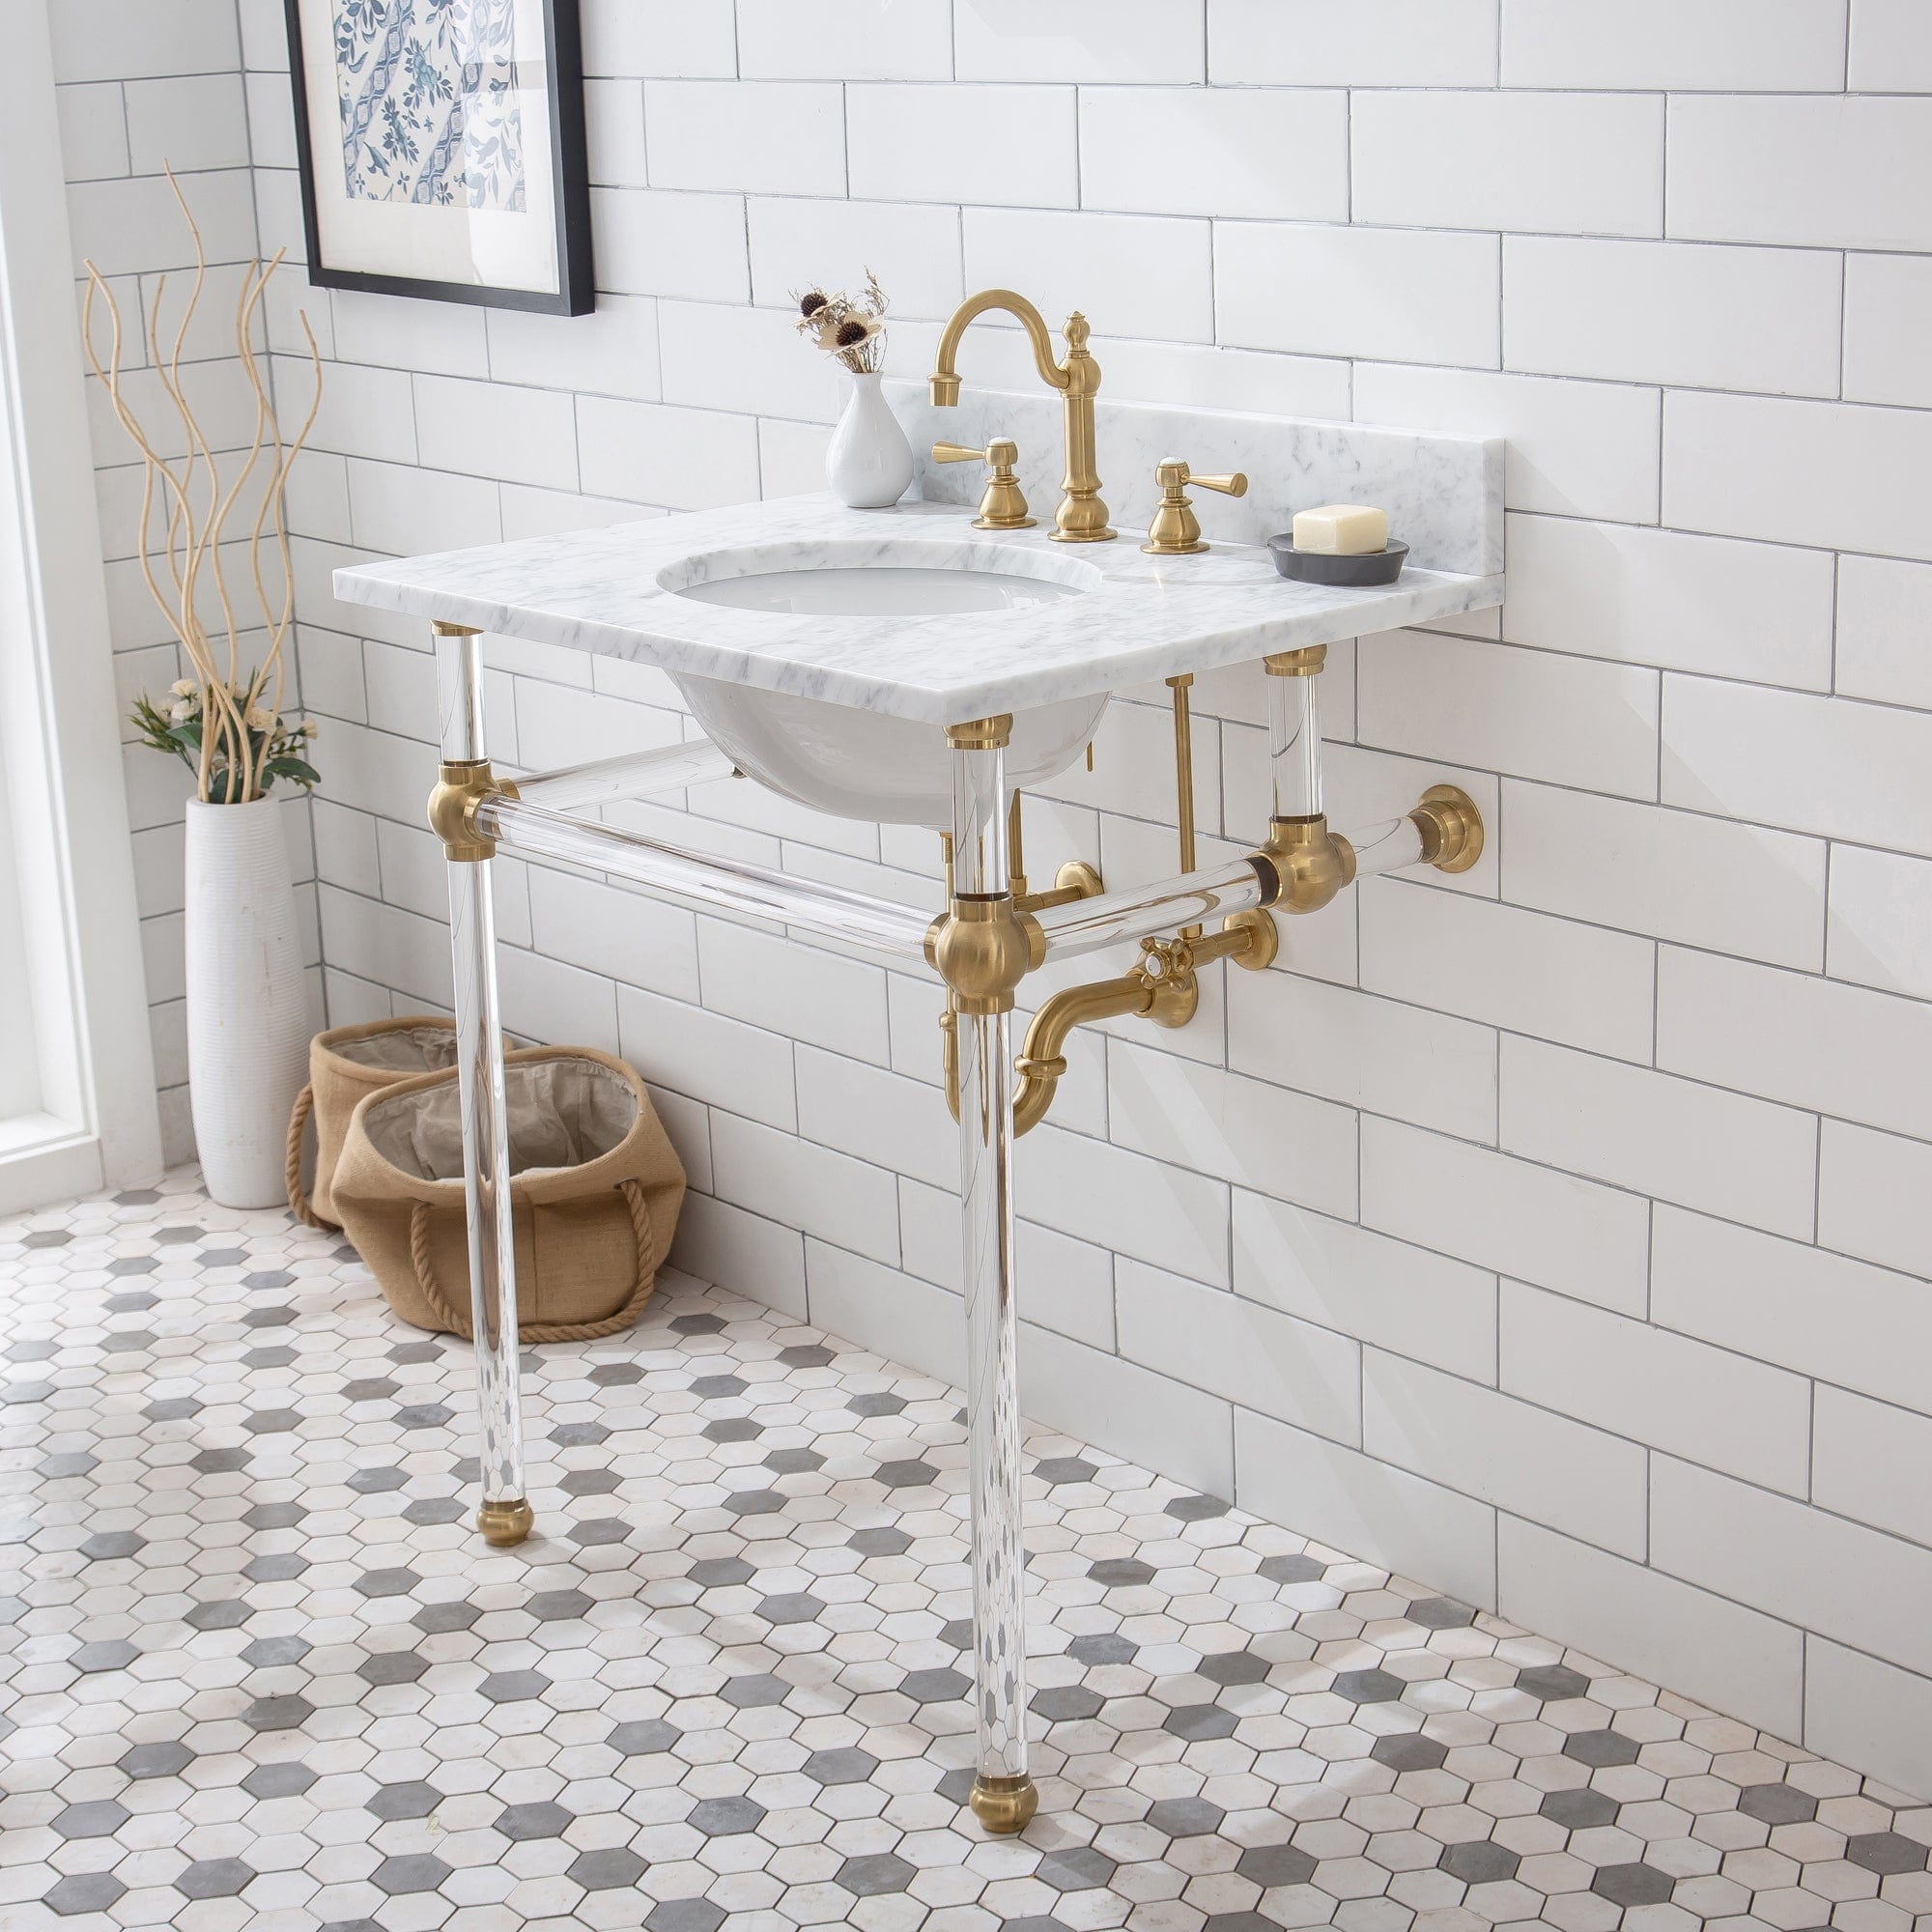 Empire 30 Inch Wide Single Wash Stand, P-Trap, and Counter Top with Basin included in Satin Gold Finish - Molaix732030762572EP30C-0600